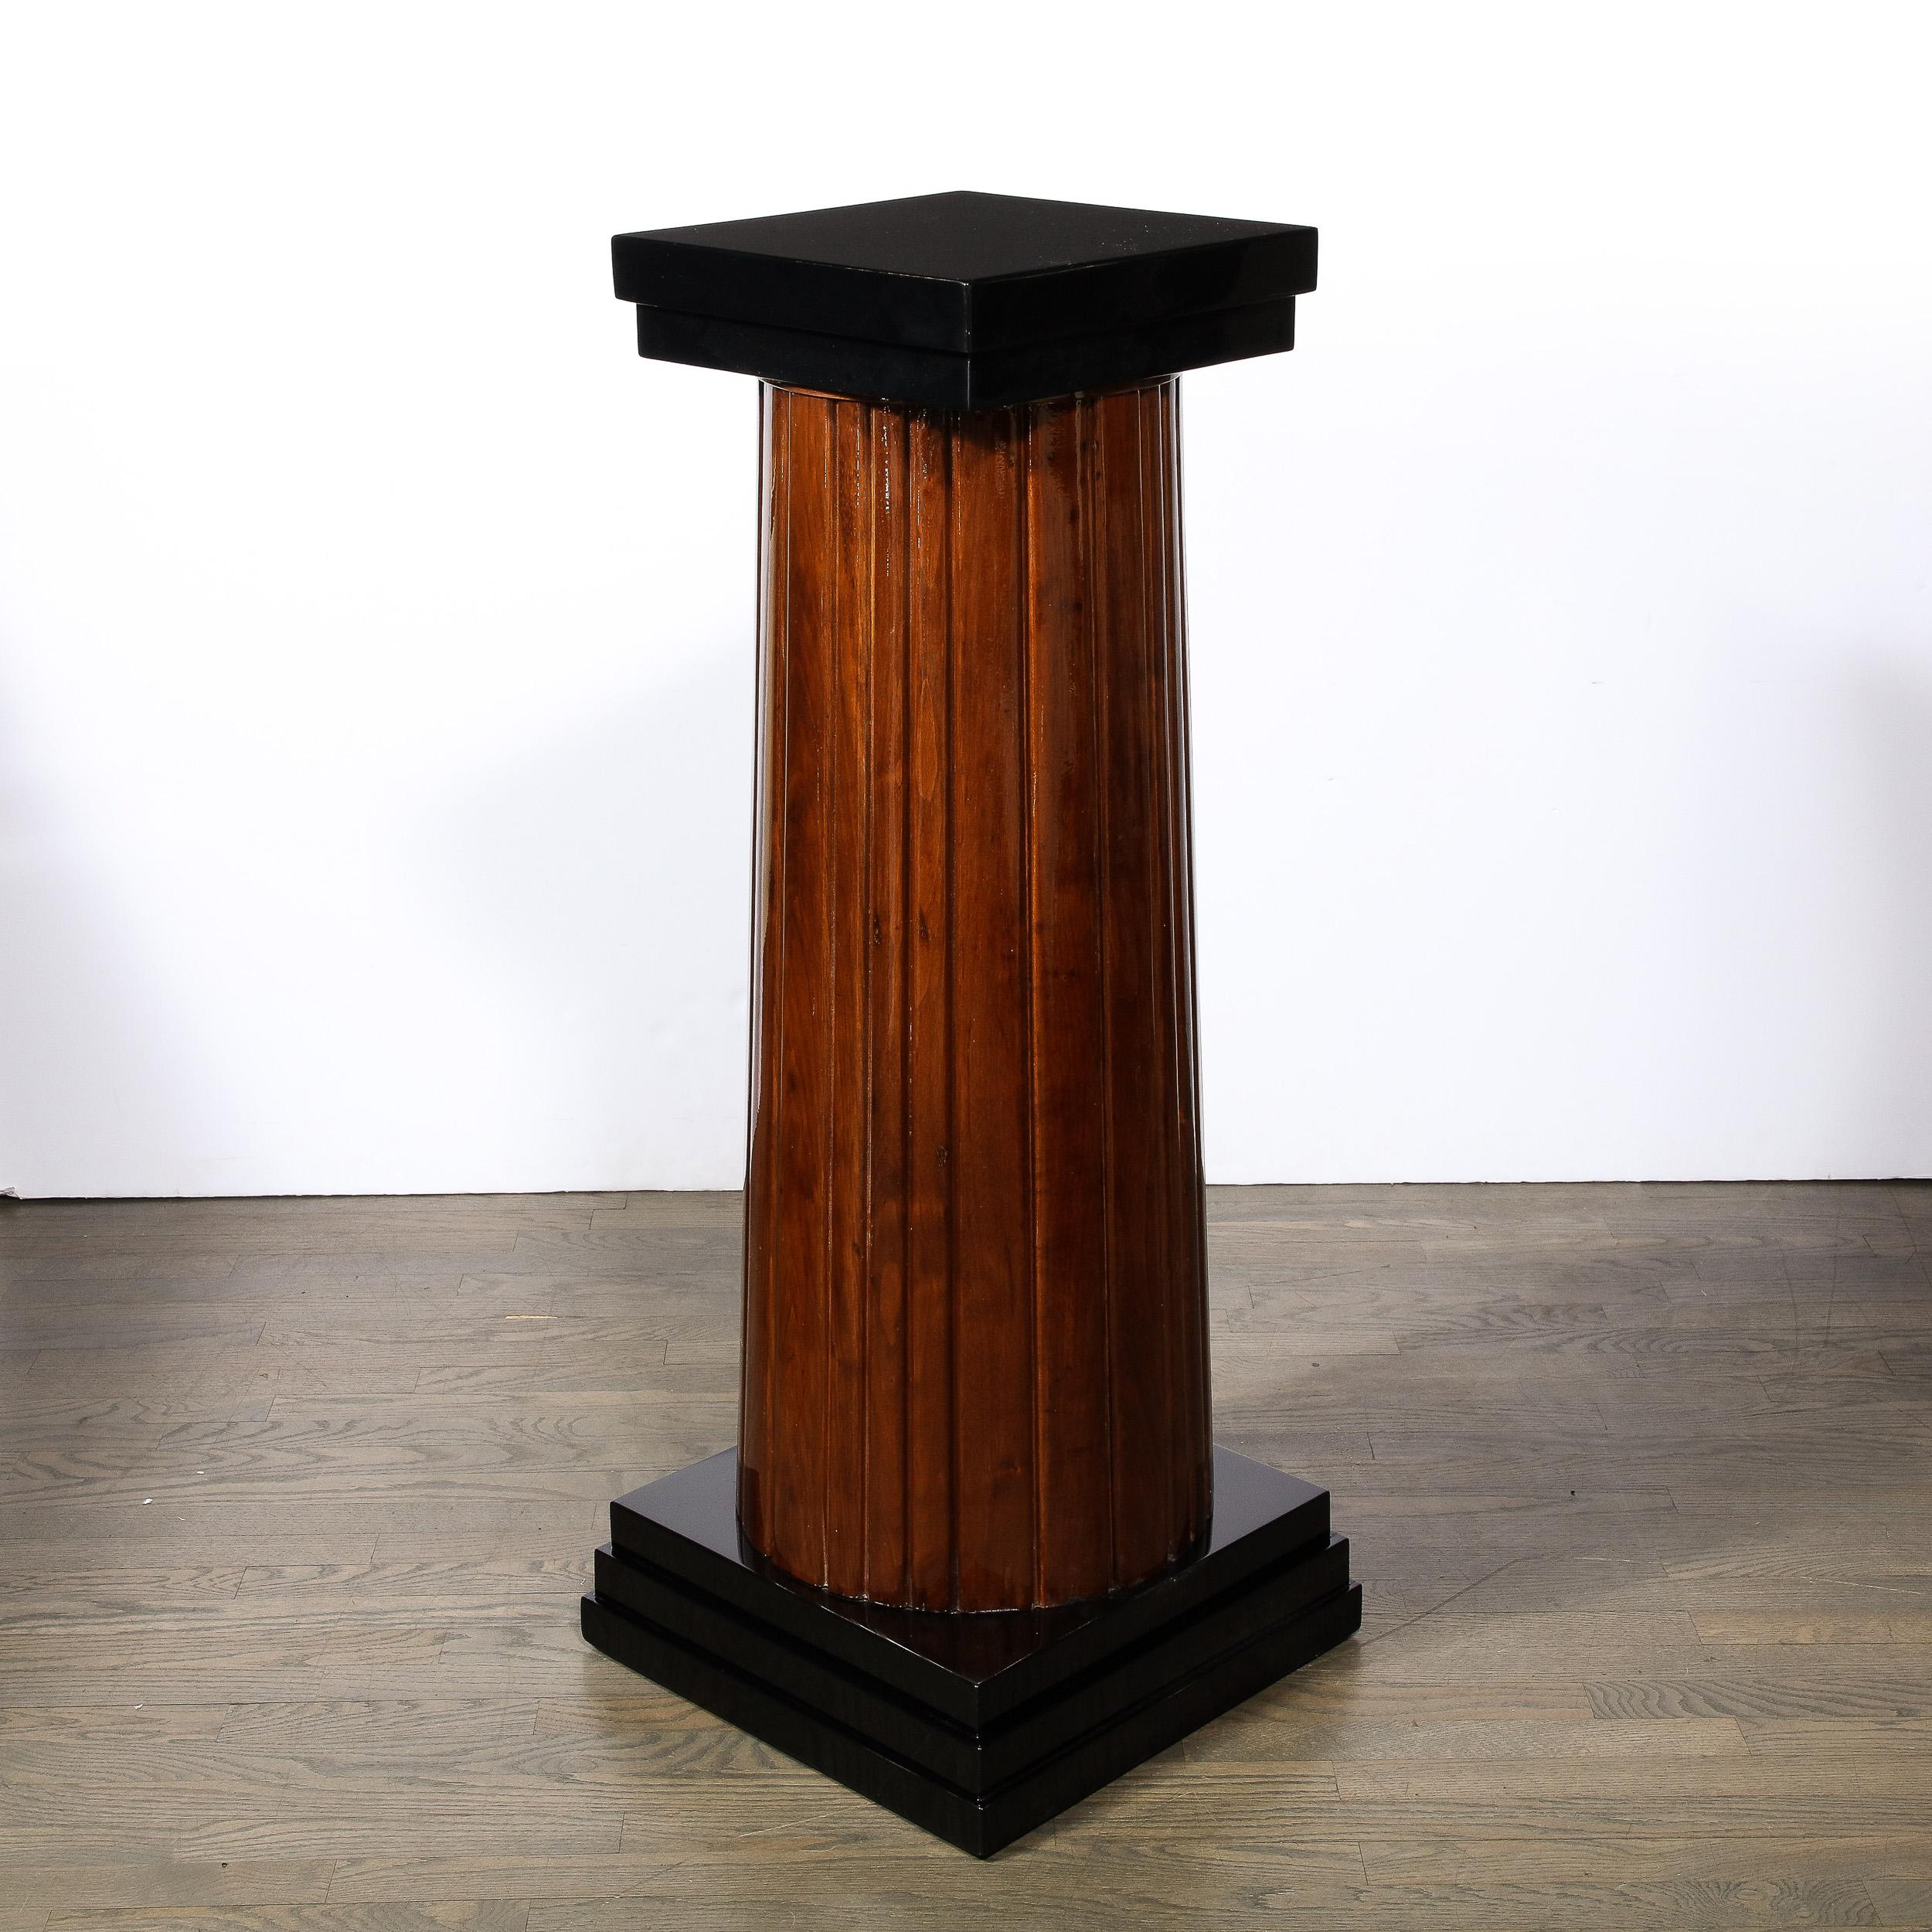 Mid-20th Century Monumental Art Deco Pedestal with Fluted Detailing in Walnut and Black Lacquer For Sale